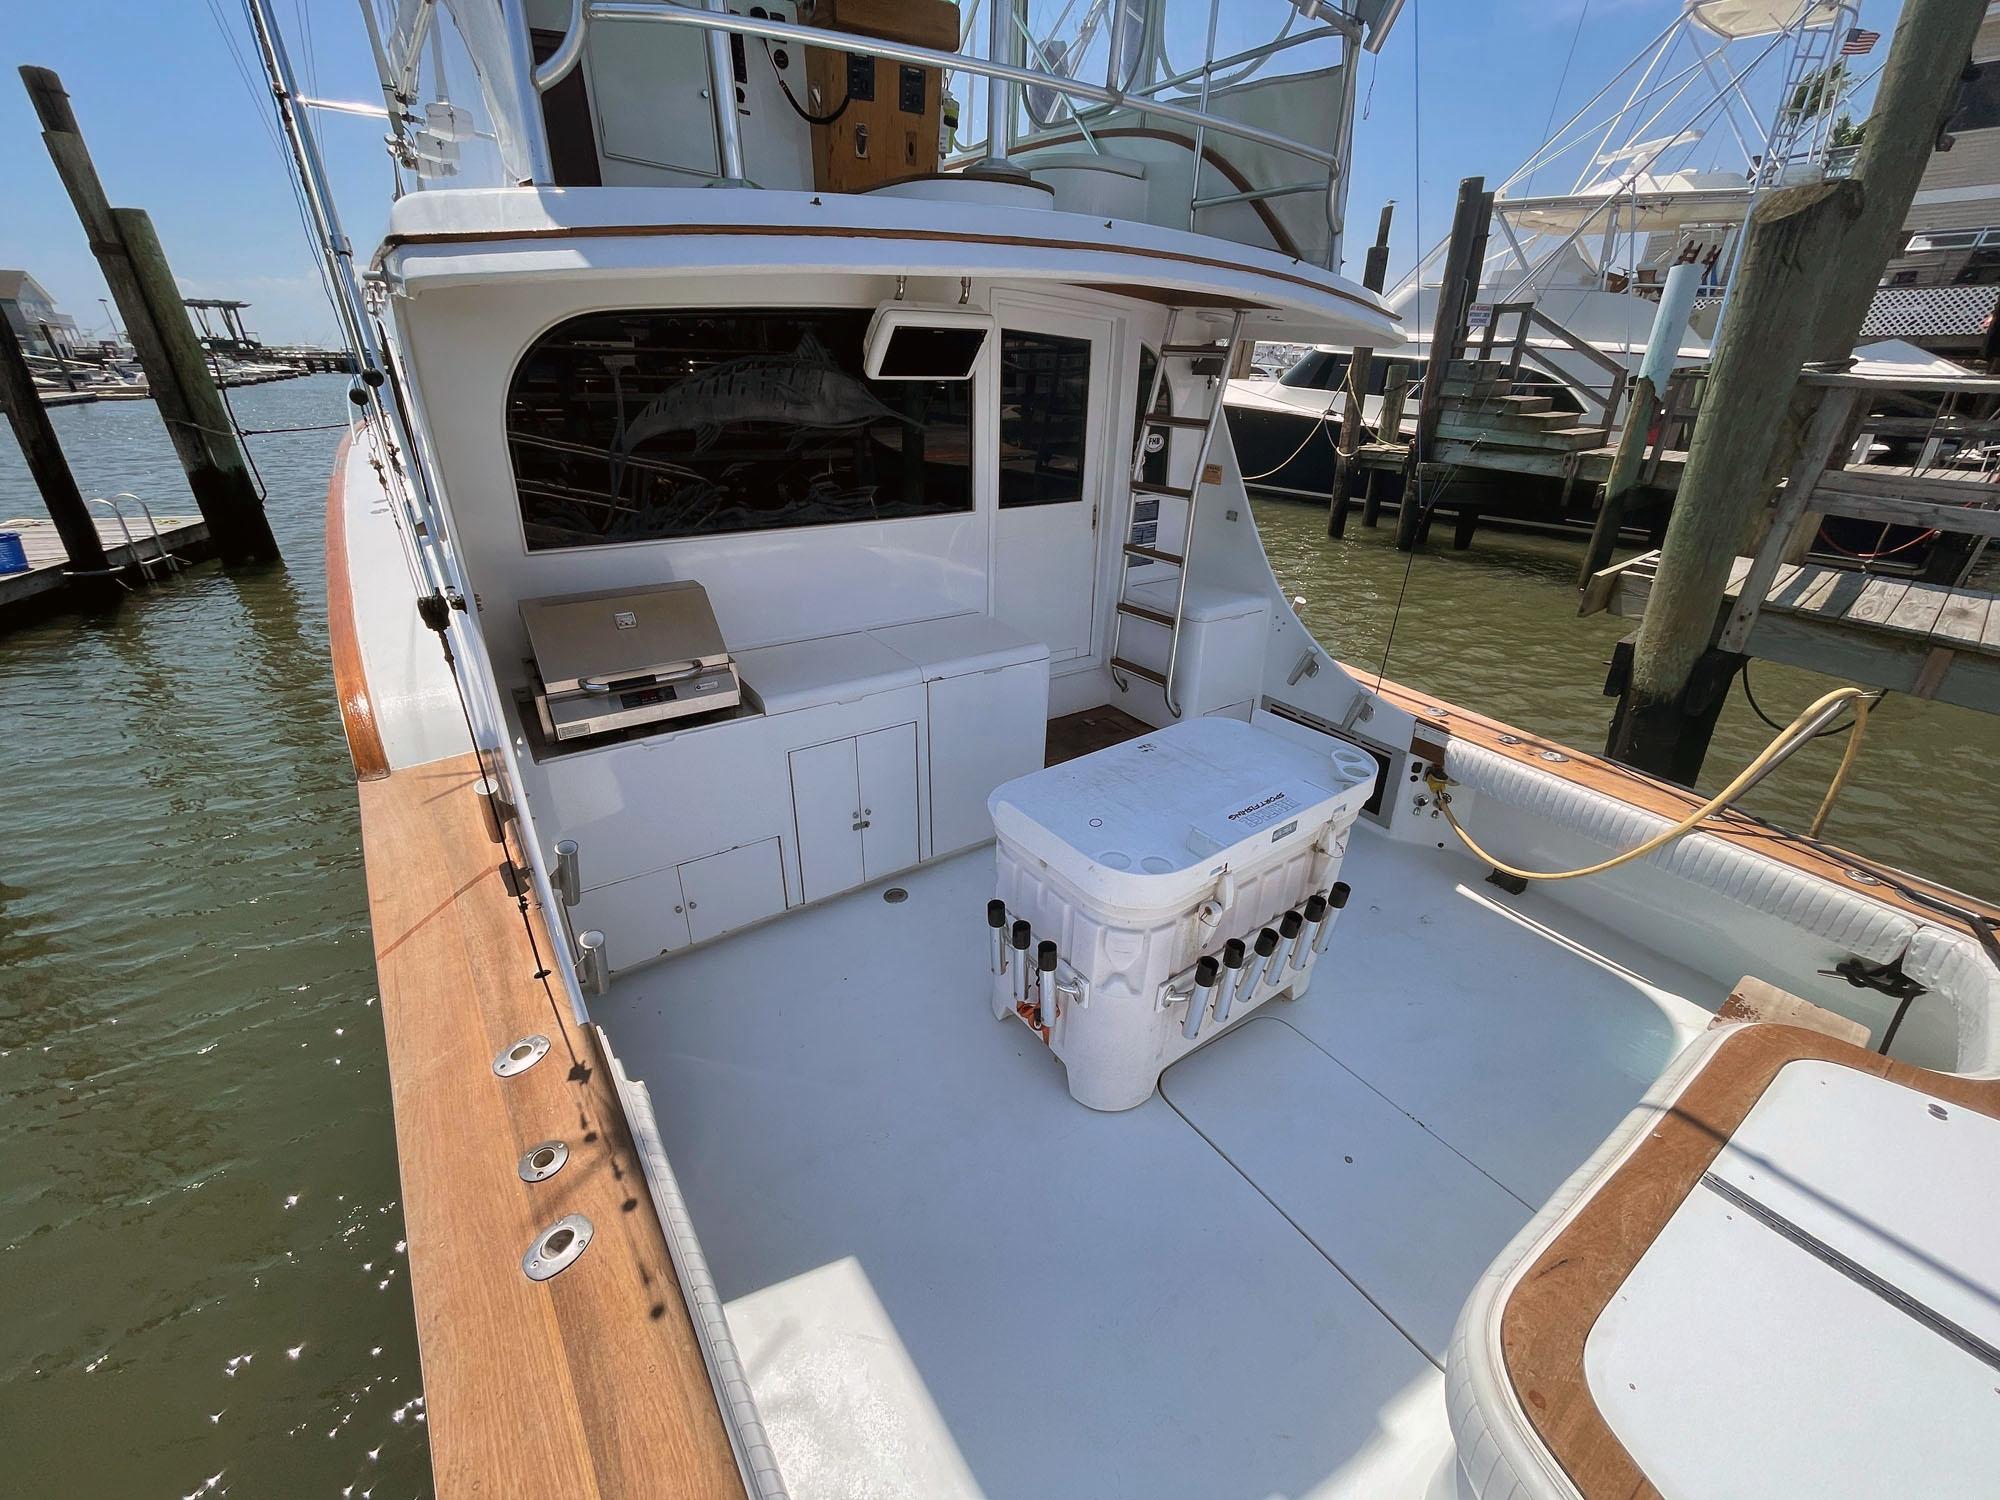 BODACIOUS Yacht for Sale in Cape May